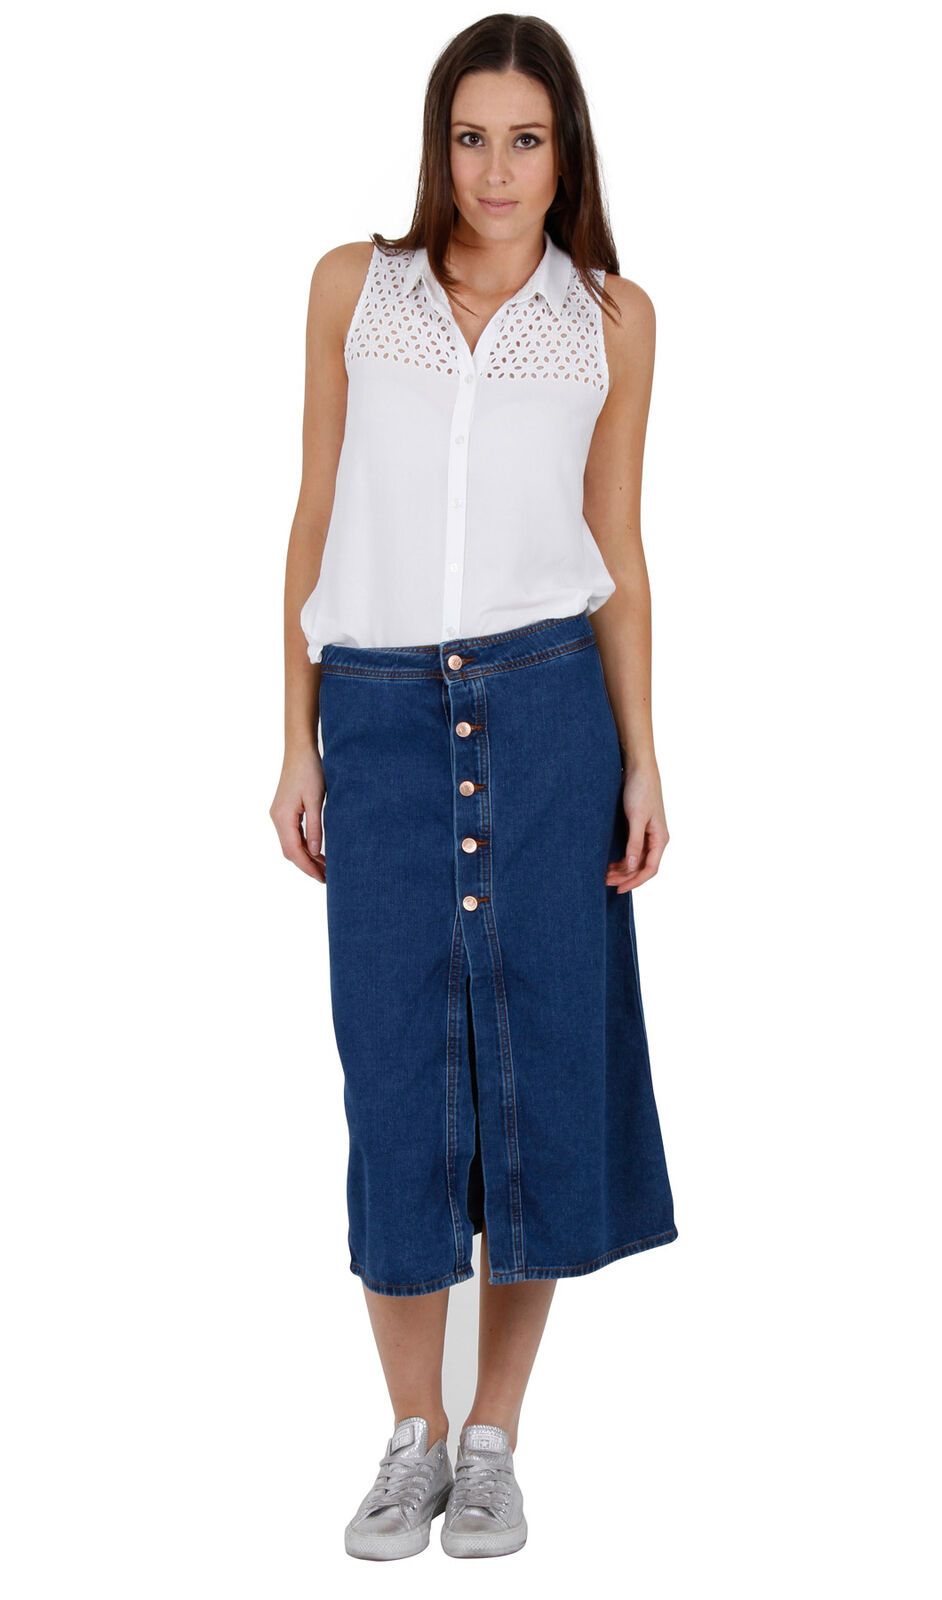 Full frontal view of fashionable button-through calf-length jean skirt from Dungarees Online.